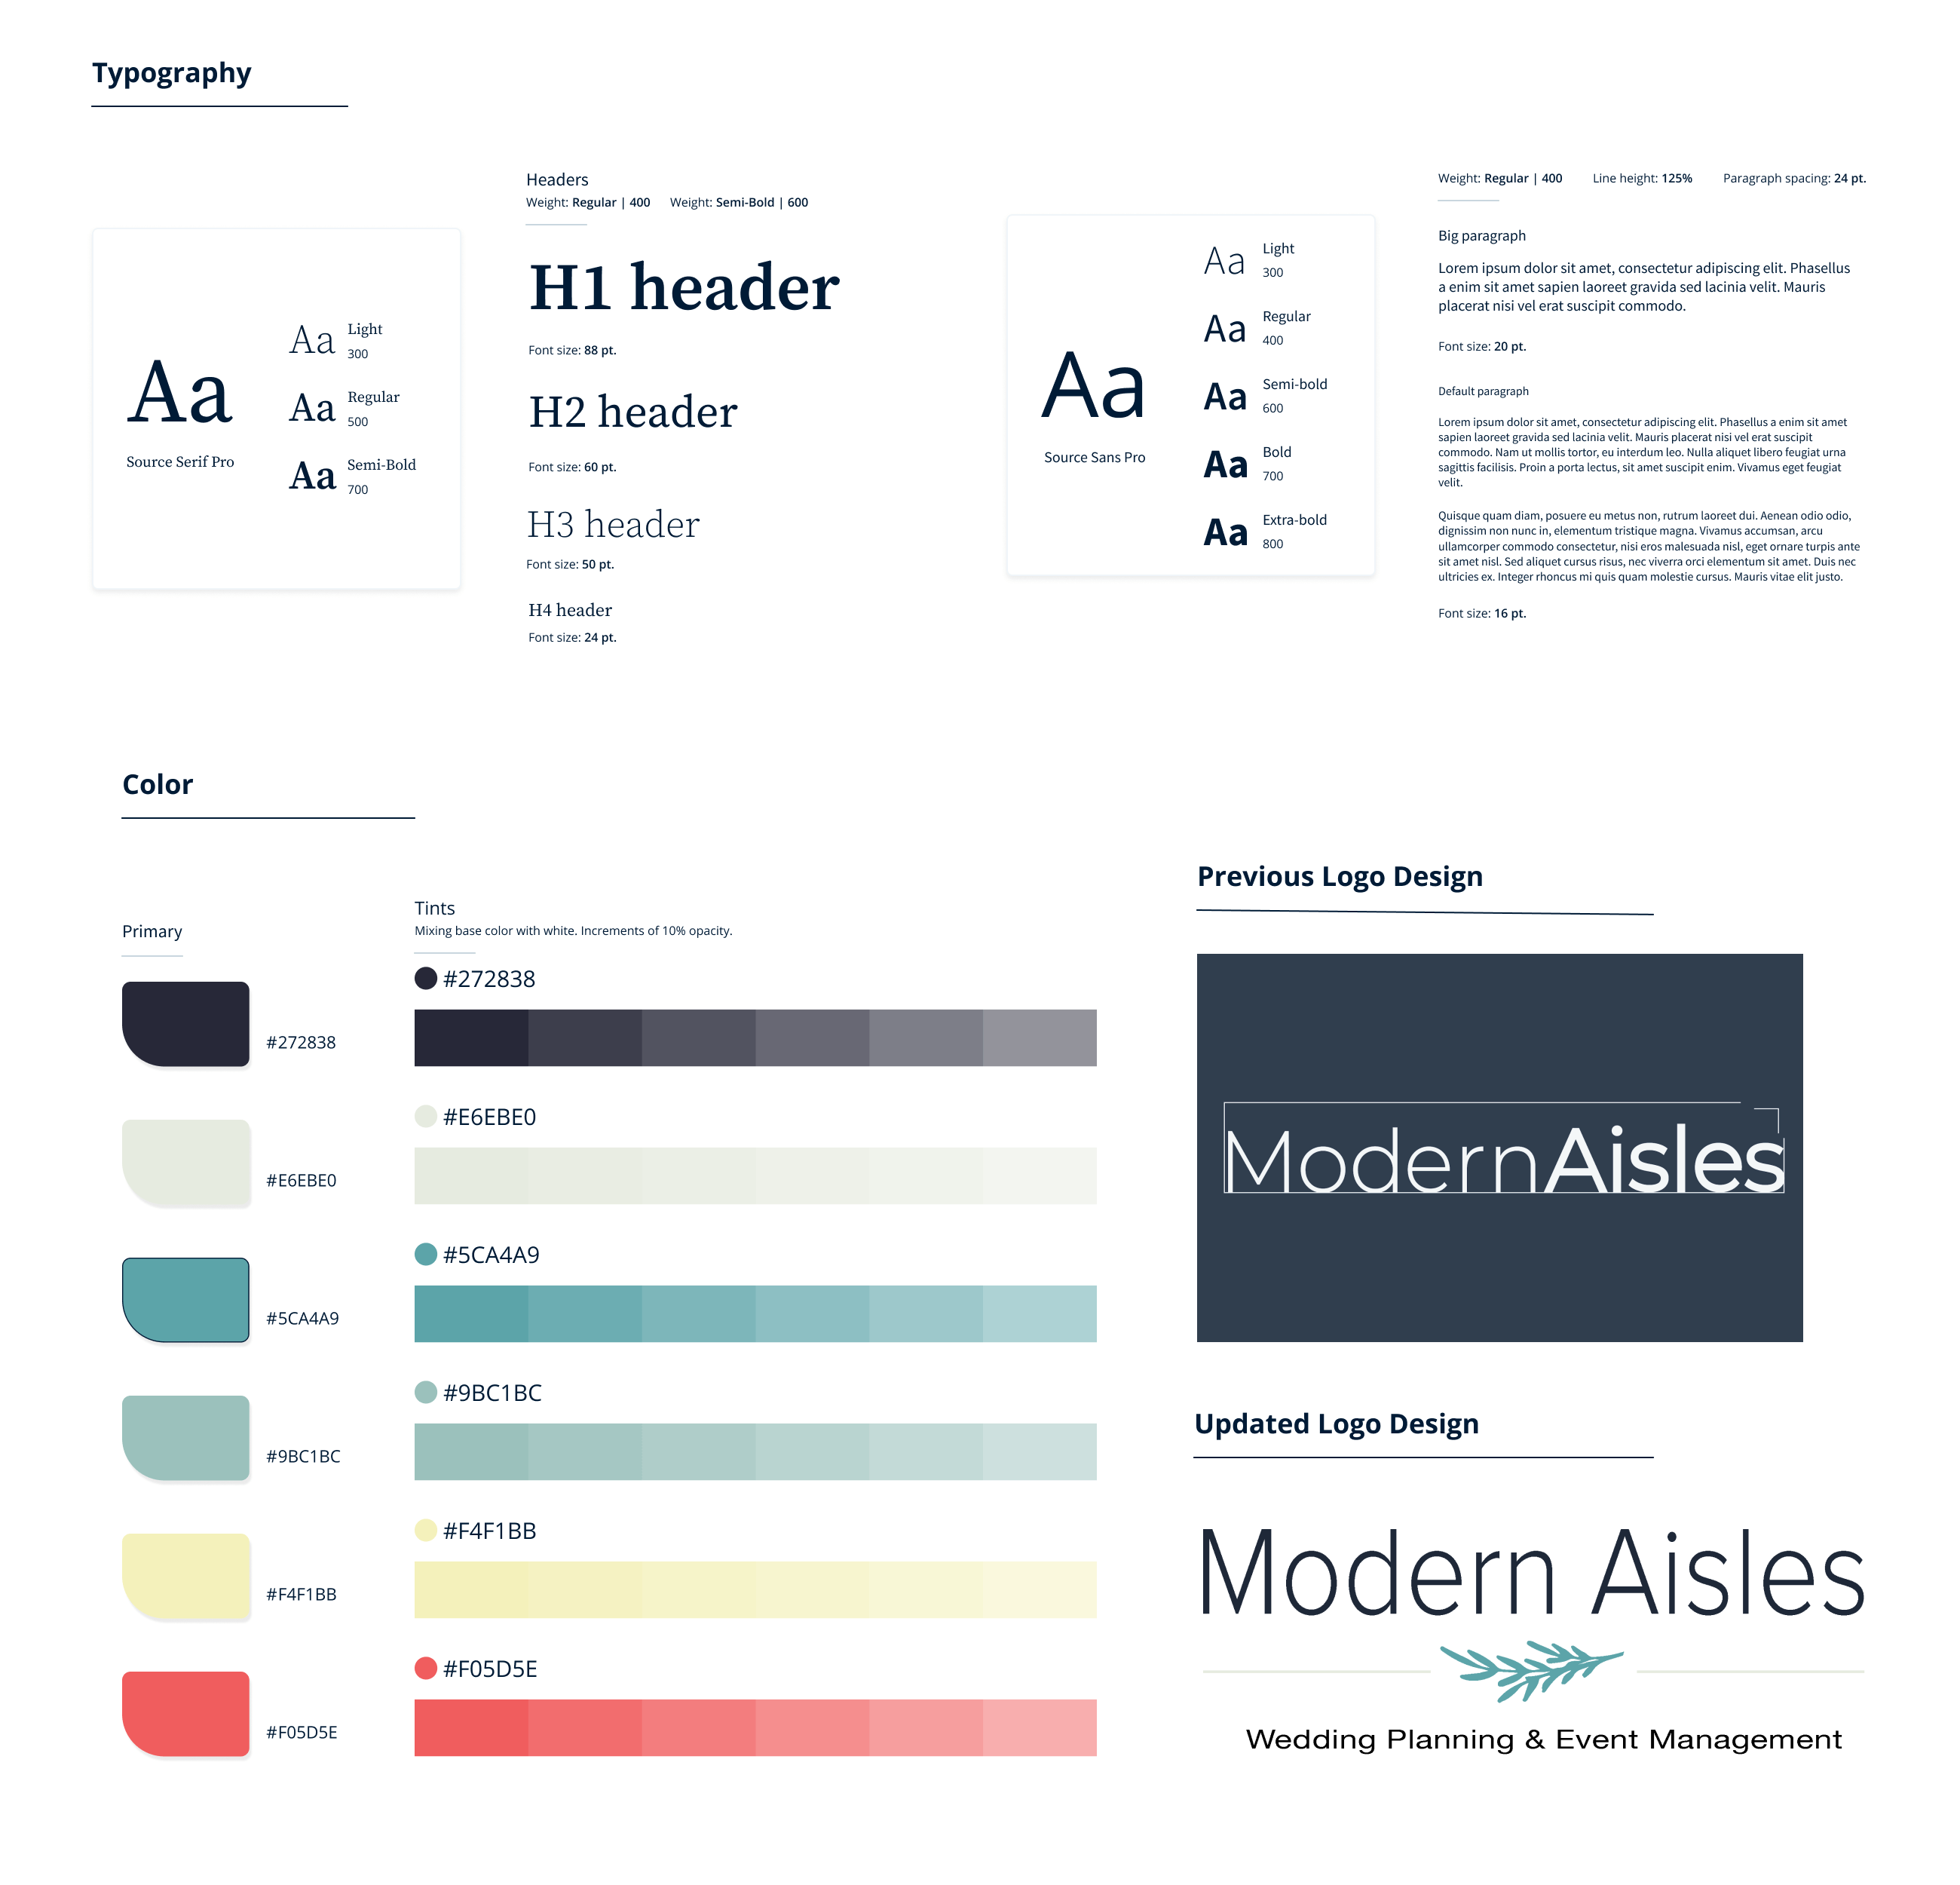 image of style guide